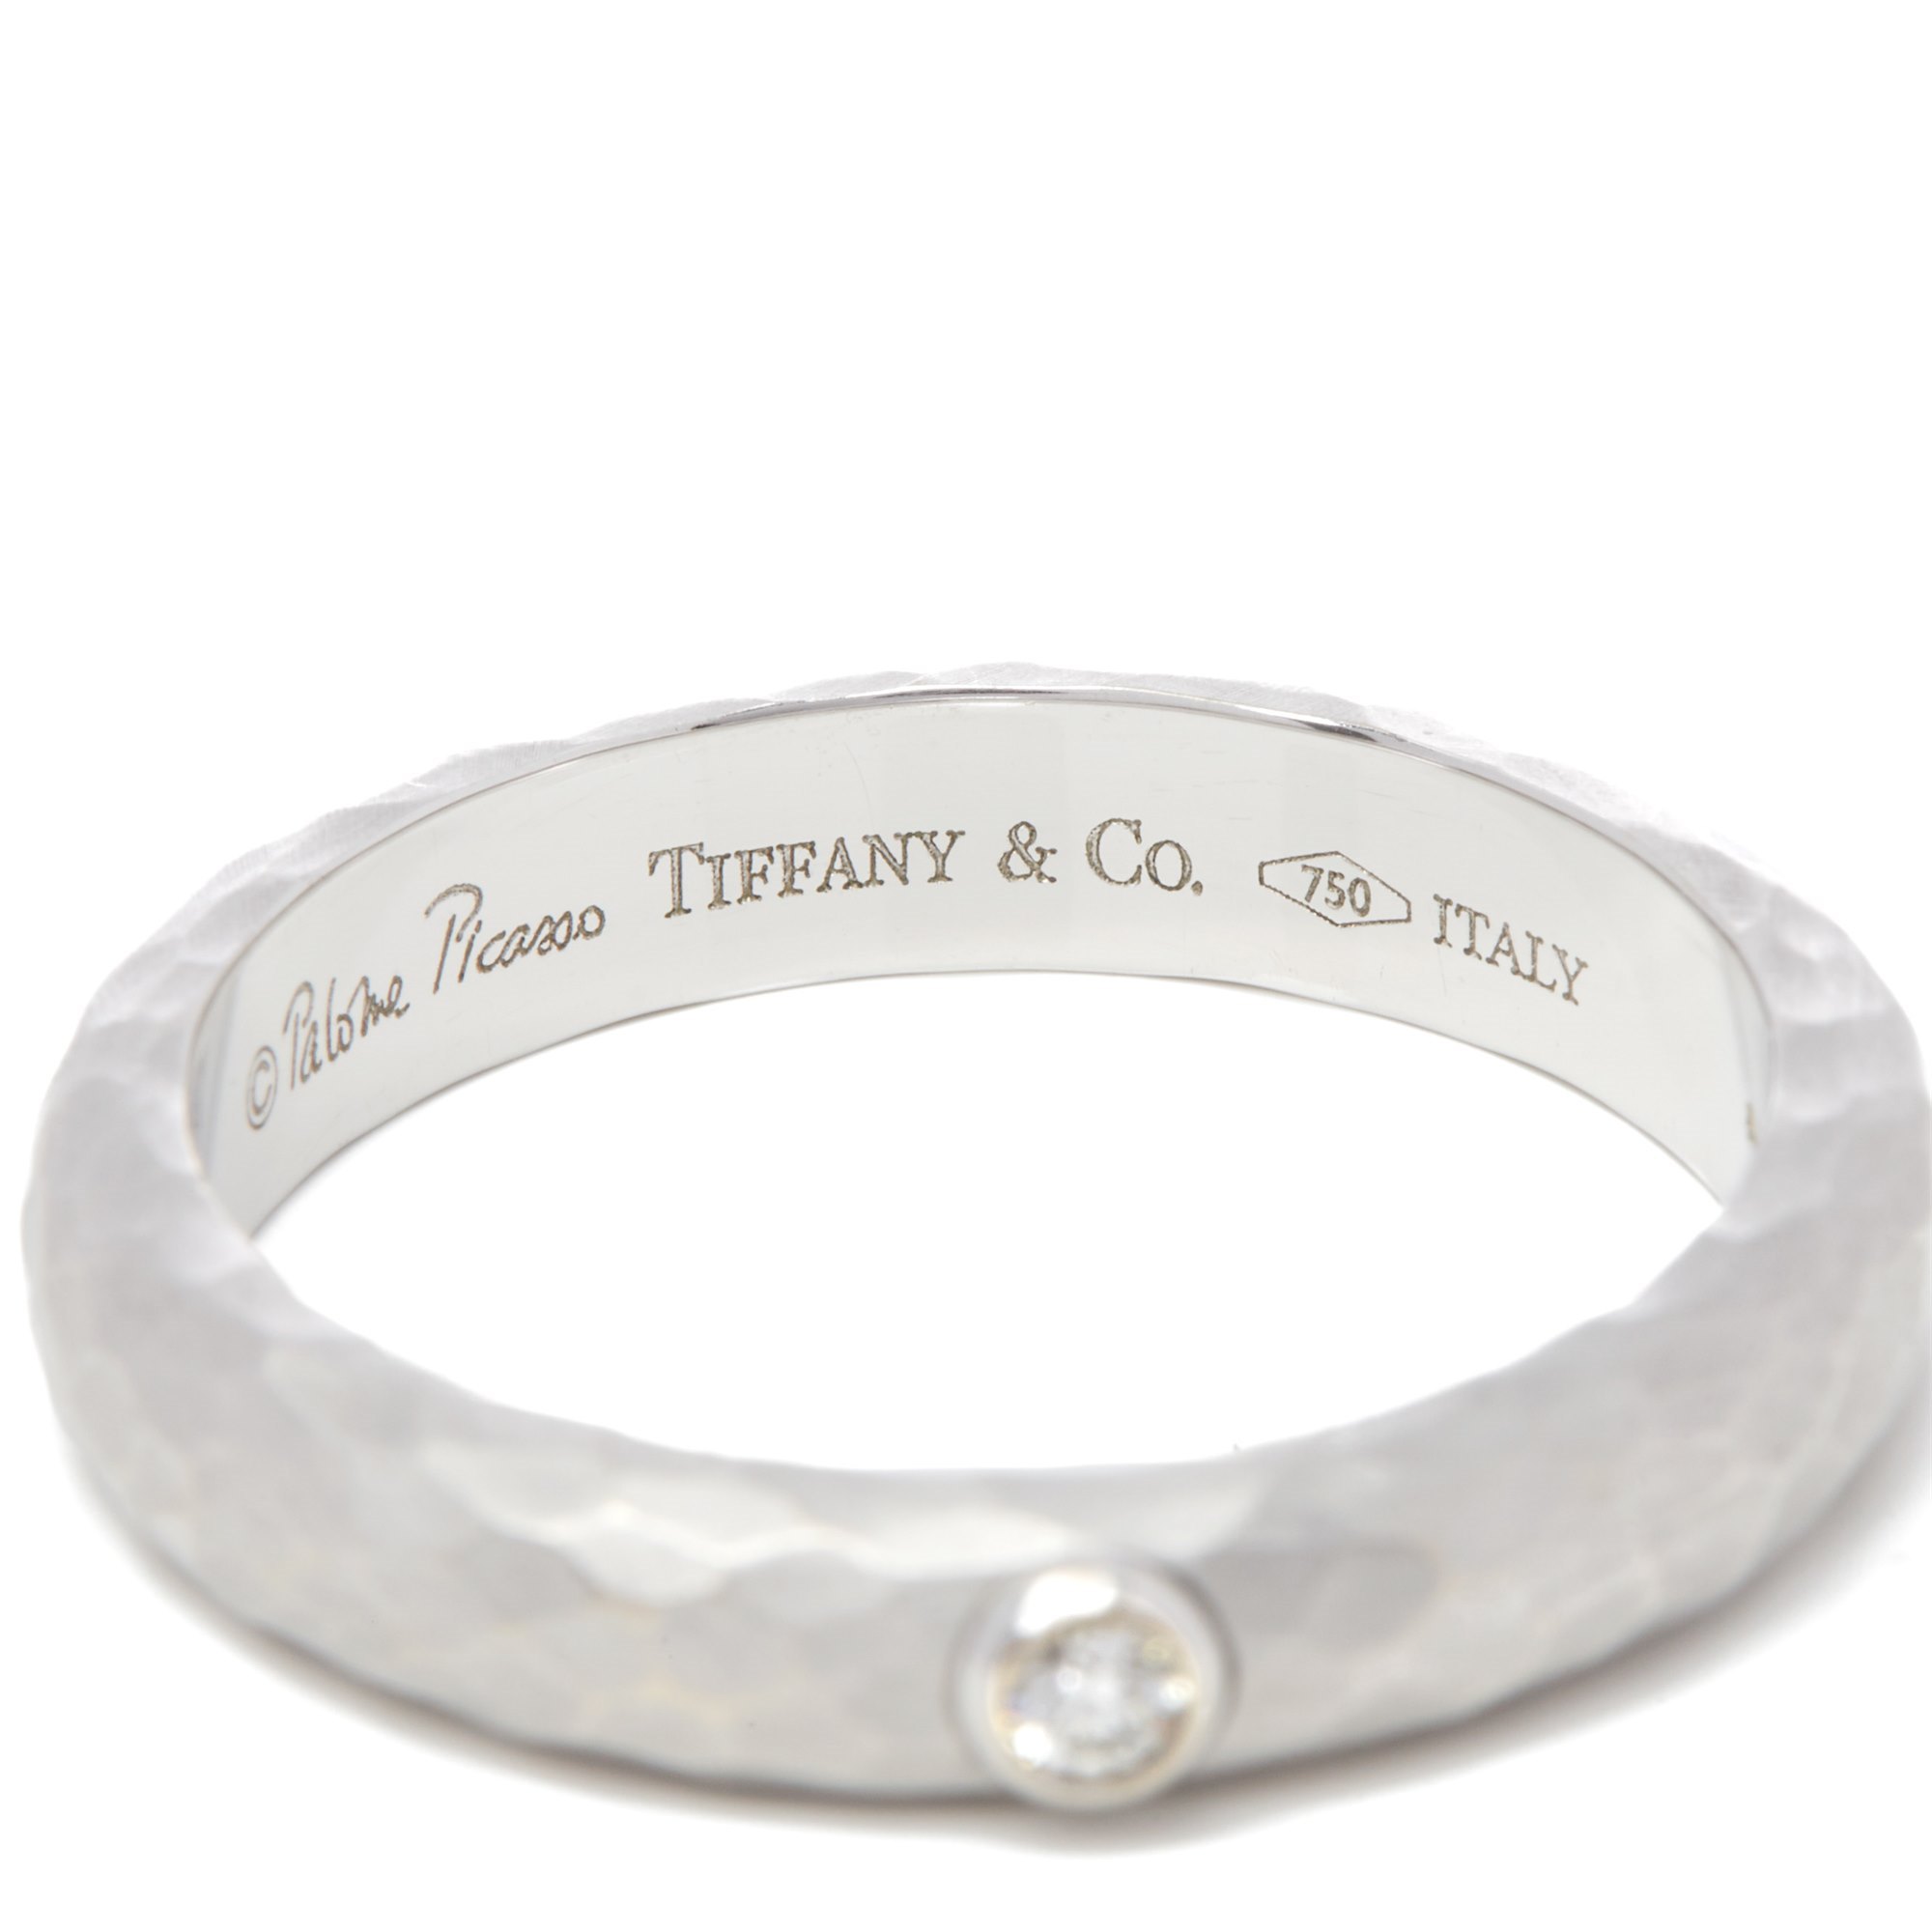 Tiffany & Co. Paloma Picasso Hammered Finish Solitaire Diamond Ring